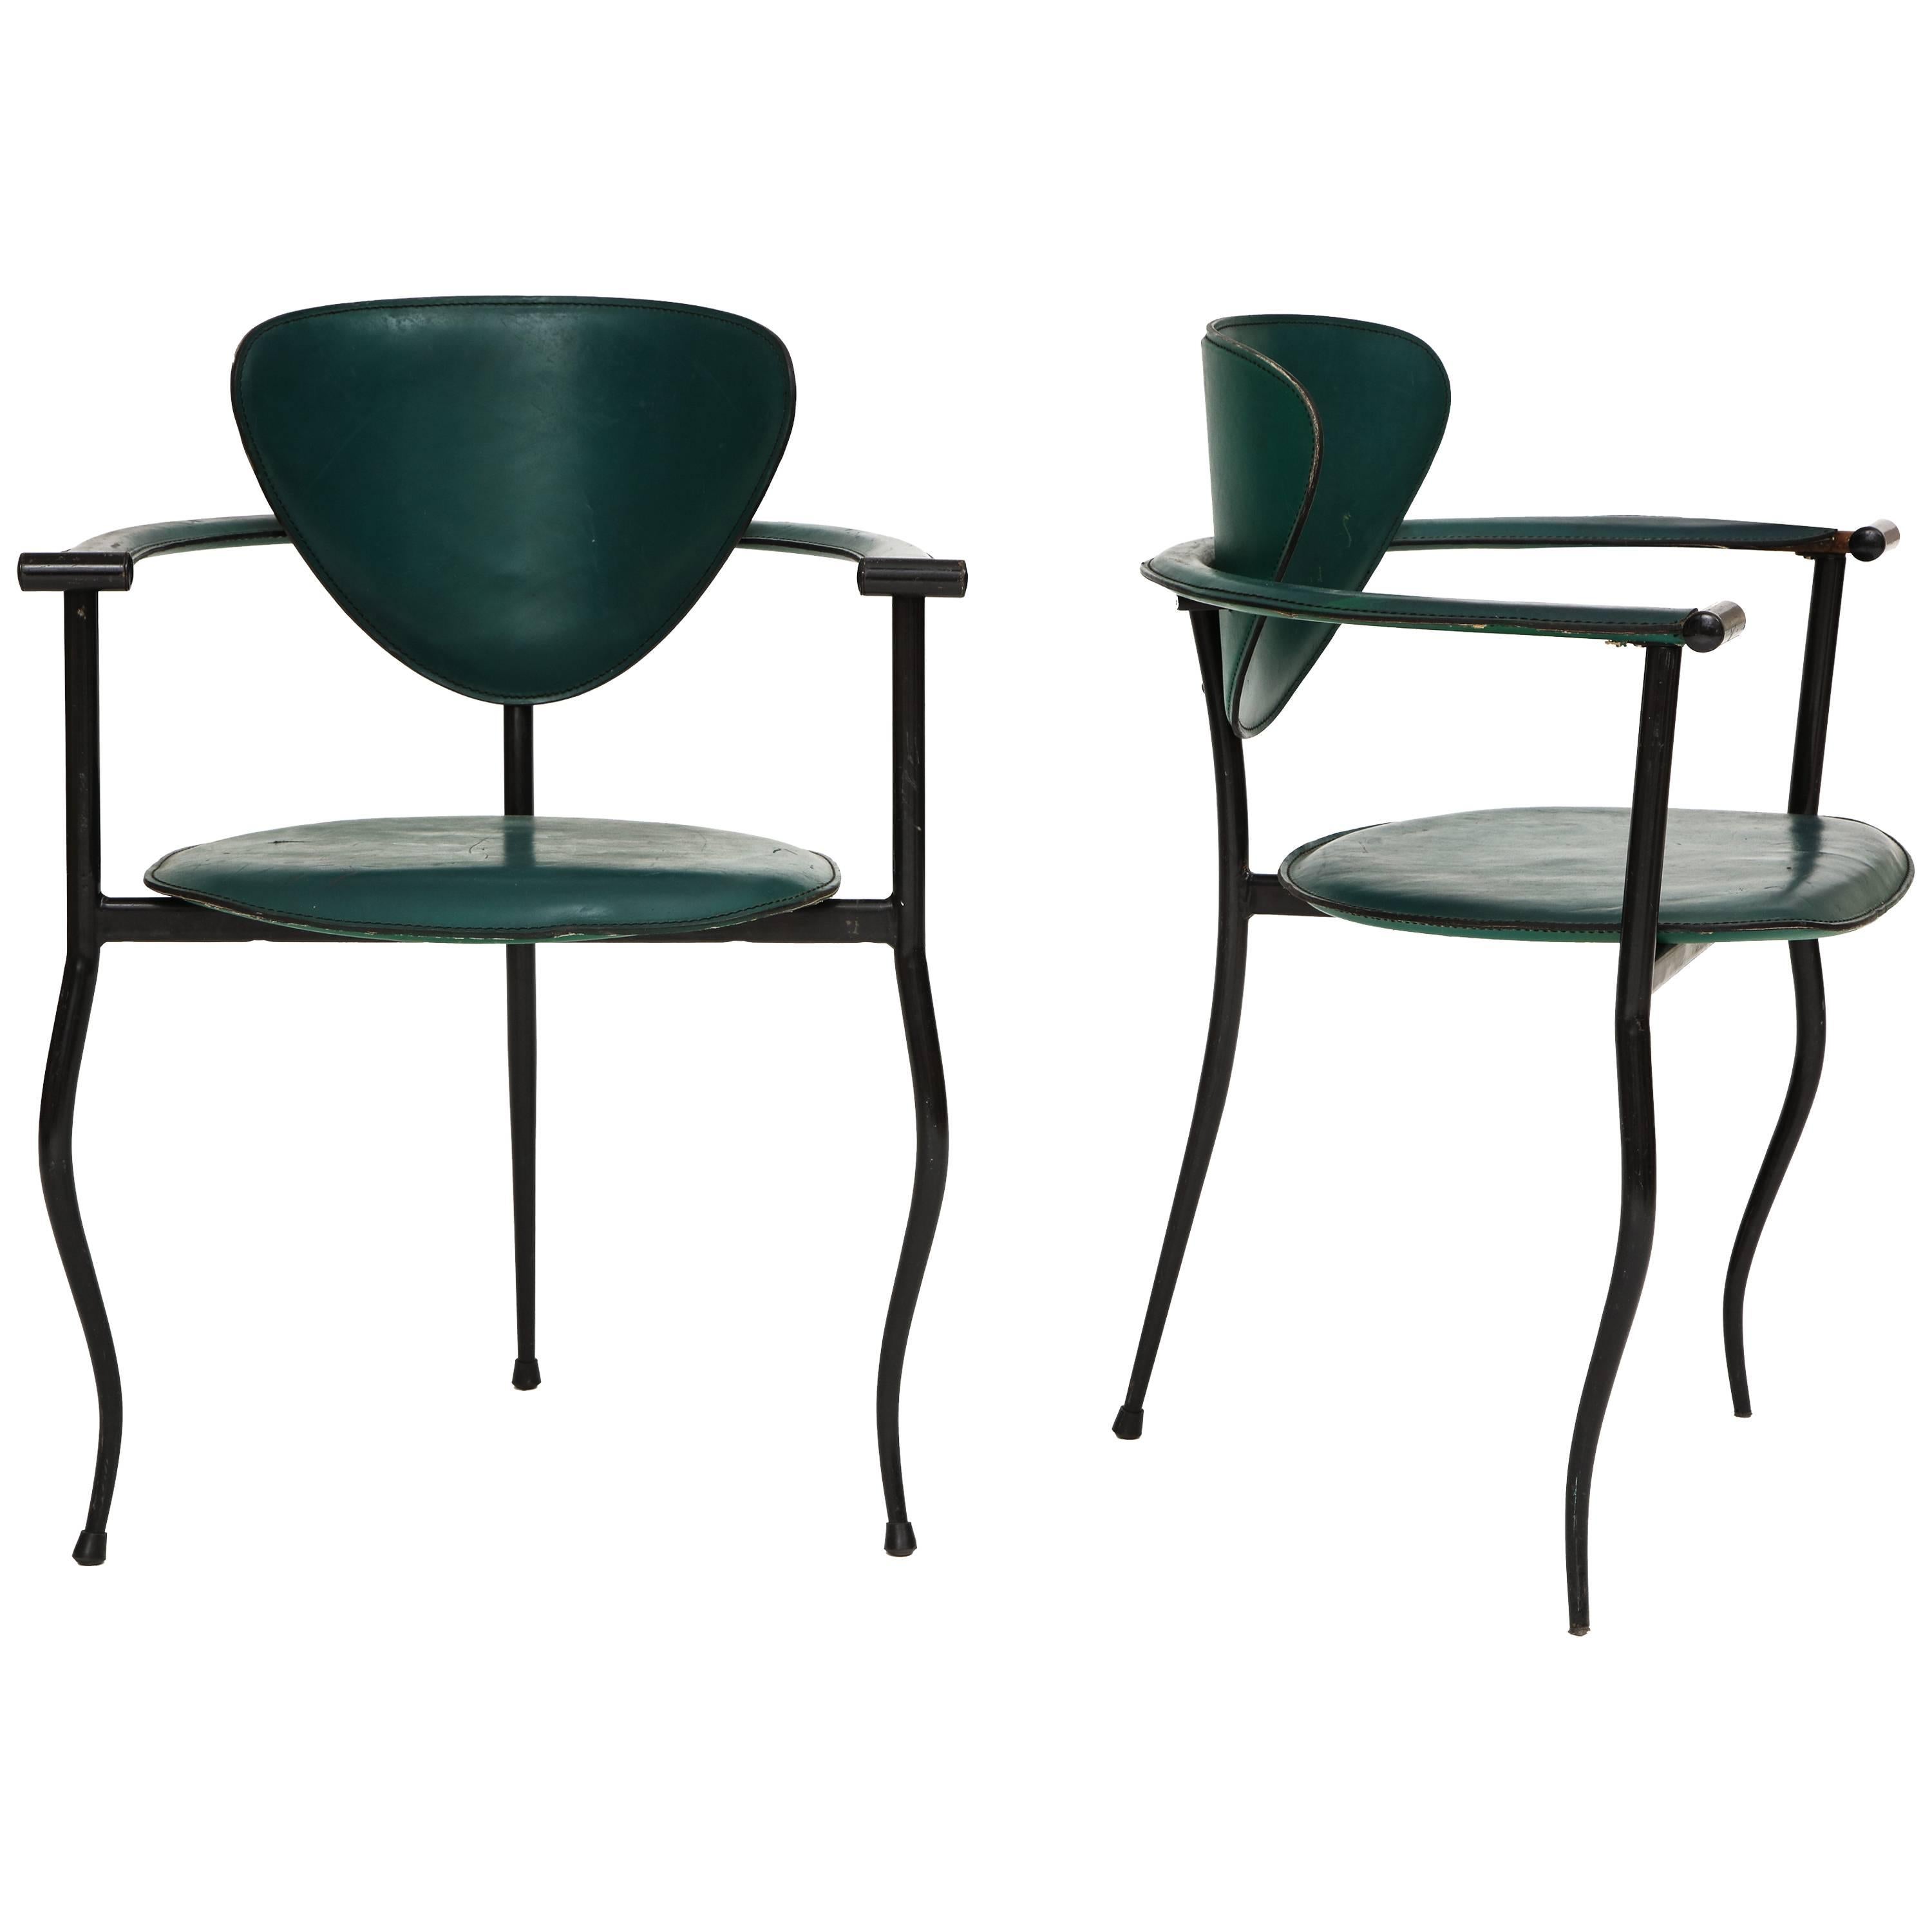 Postmodern Sculptural Green Leather and Iron Side Chairs, 1980s-1990s